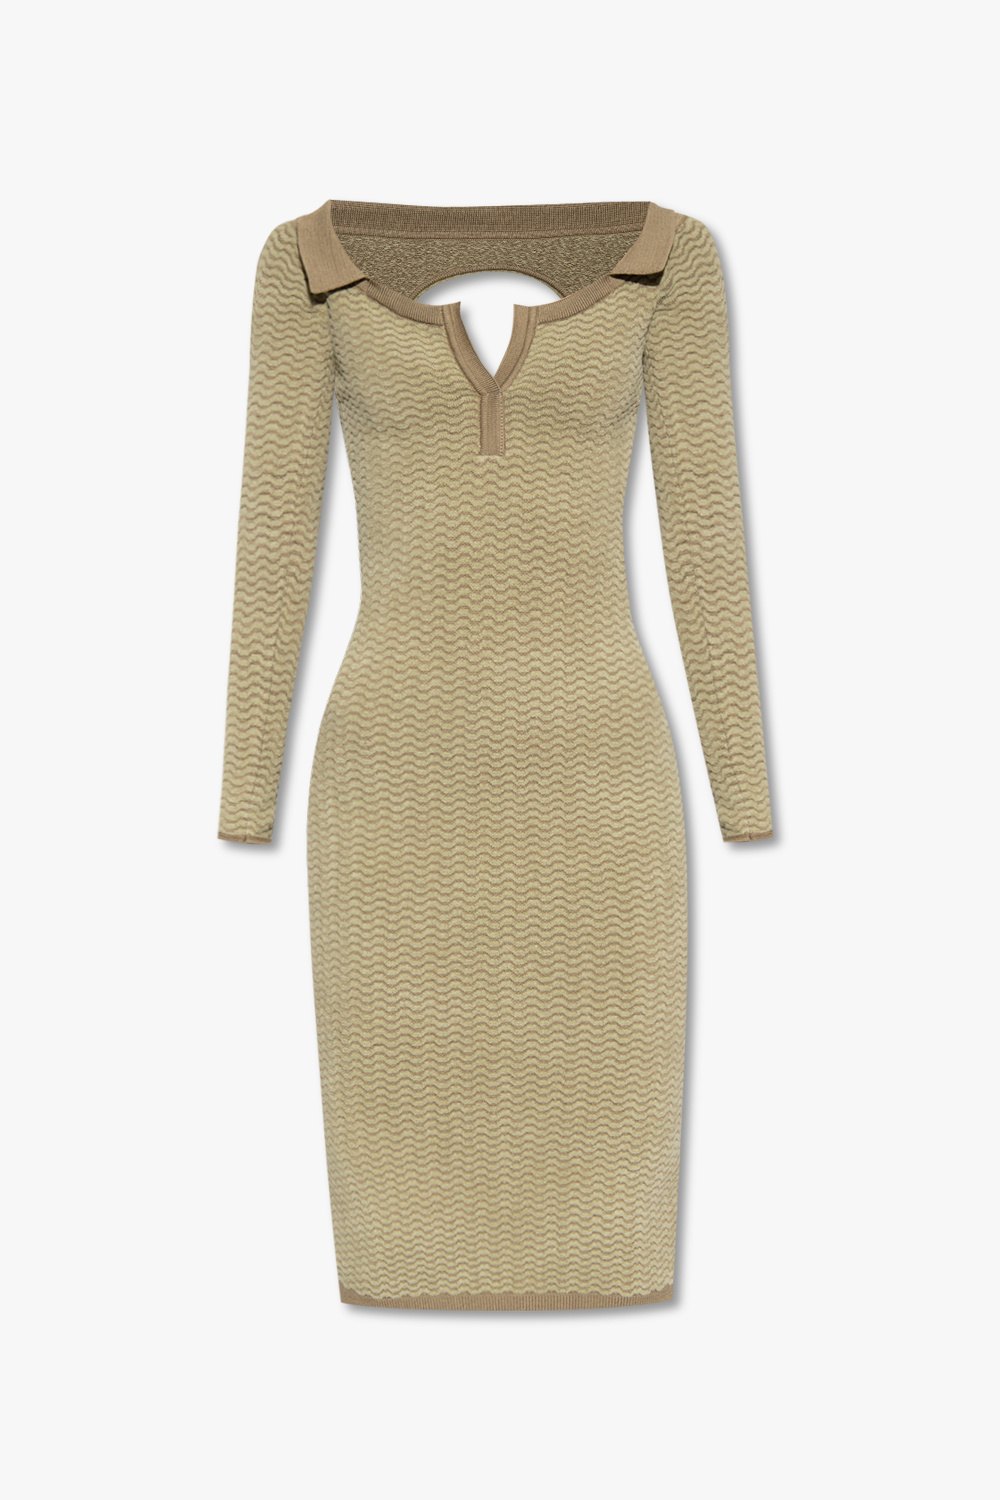 Jacquemus ‘Pampero’ cut-out that dress